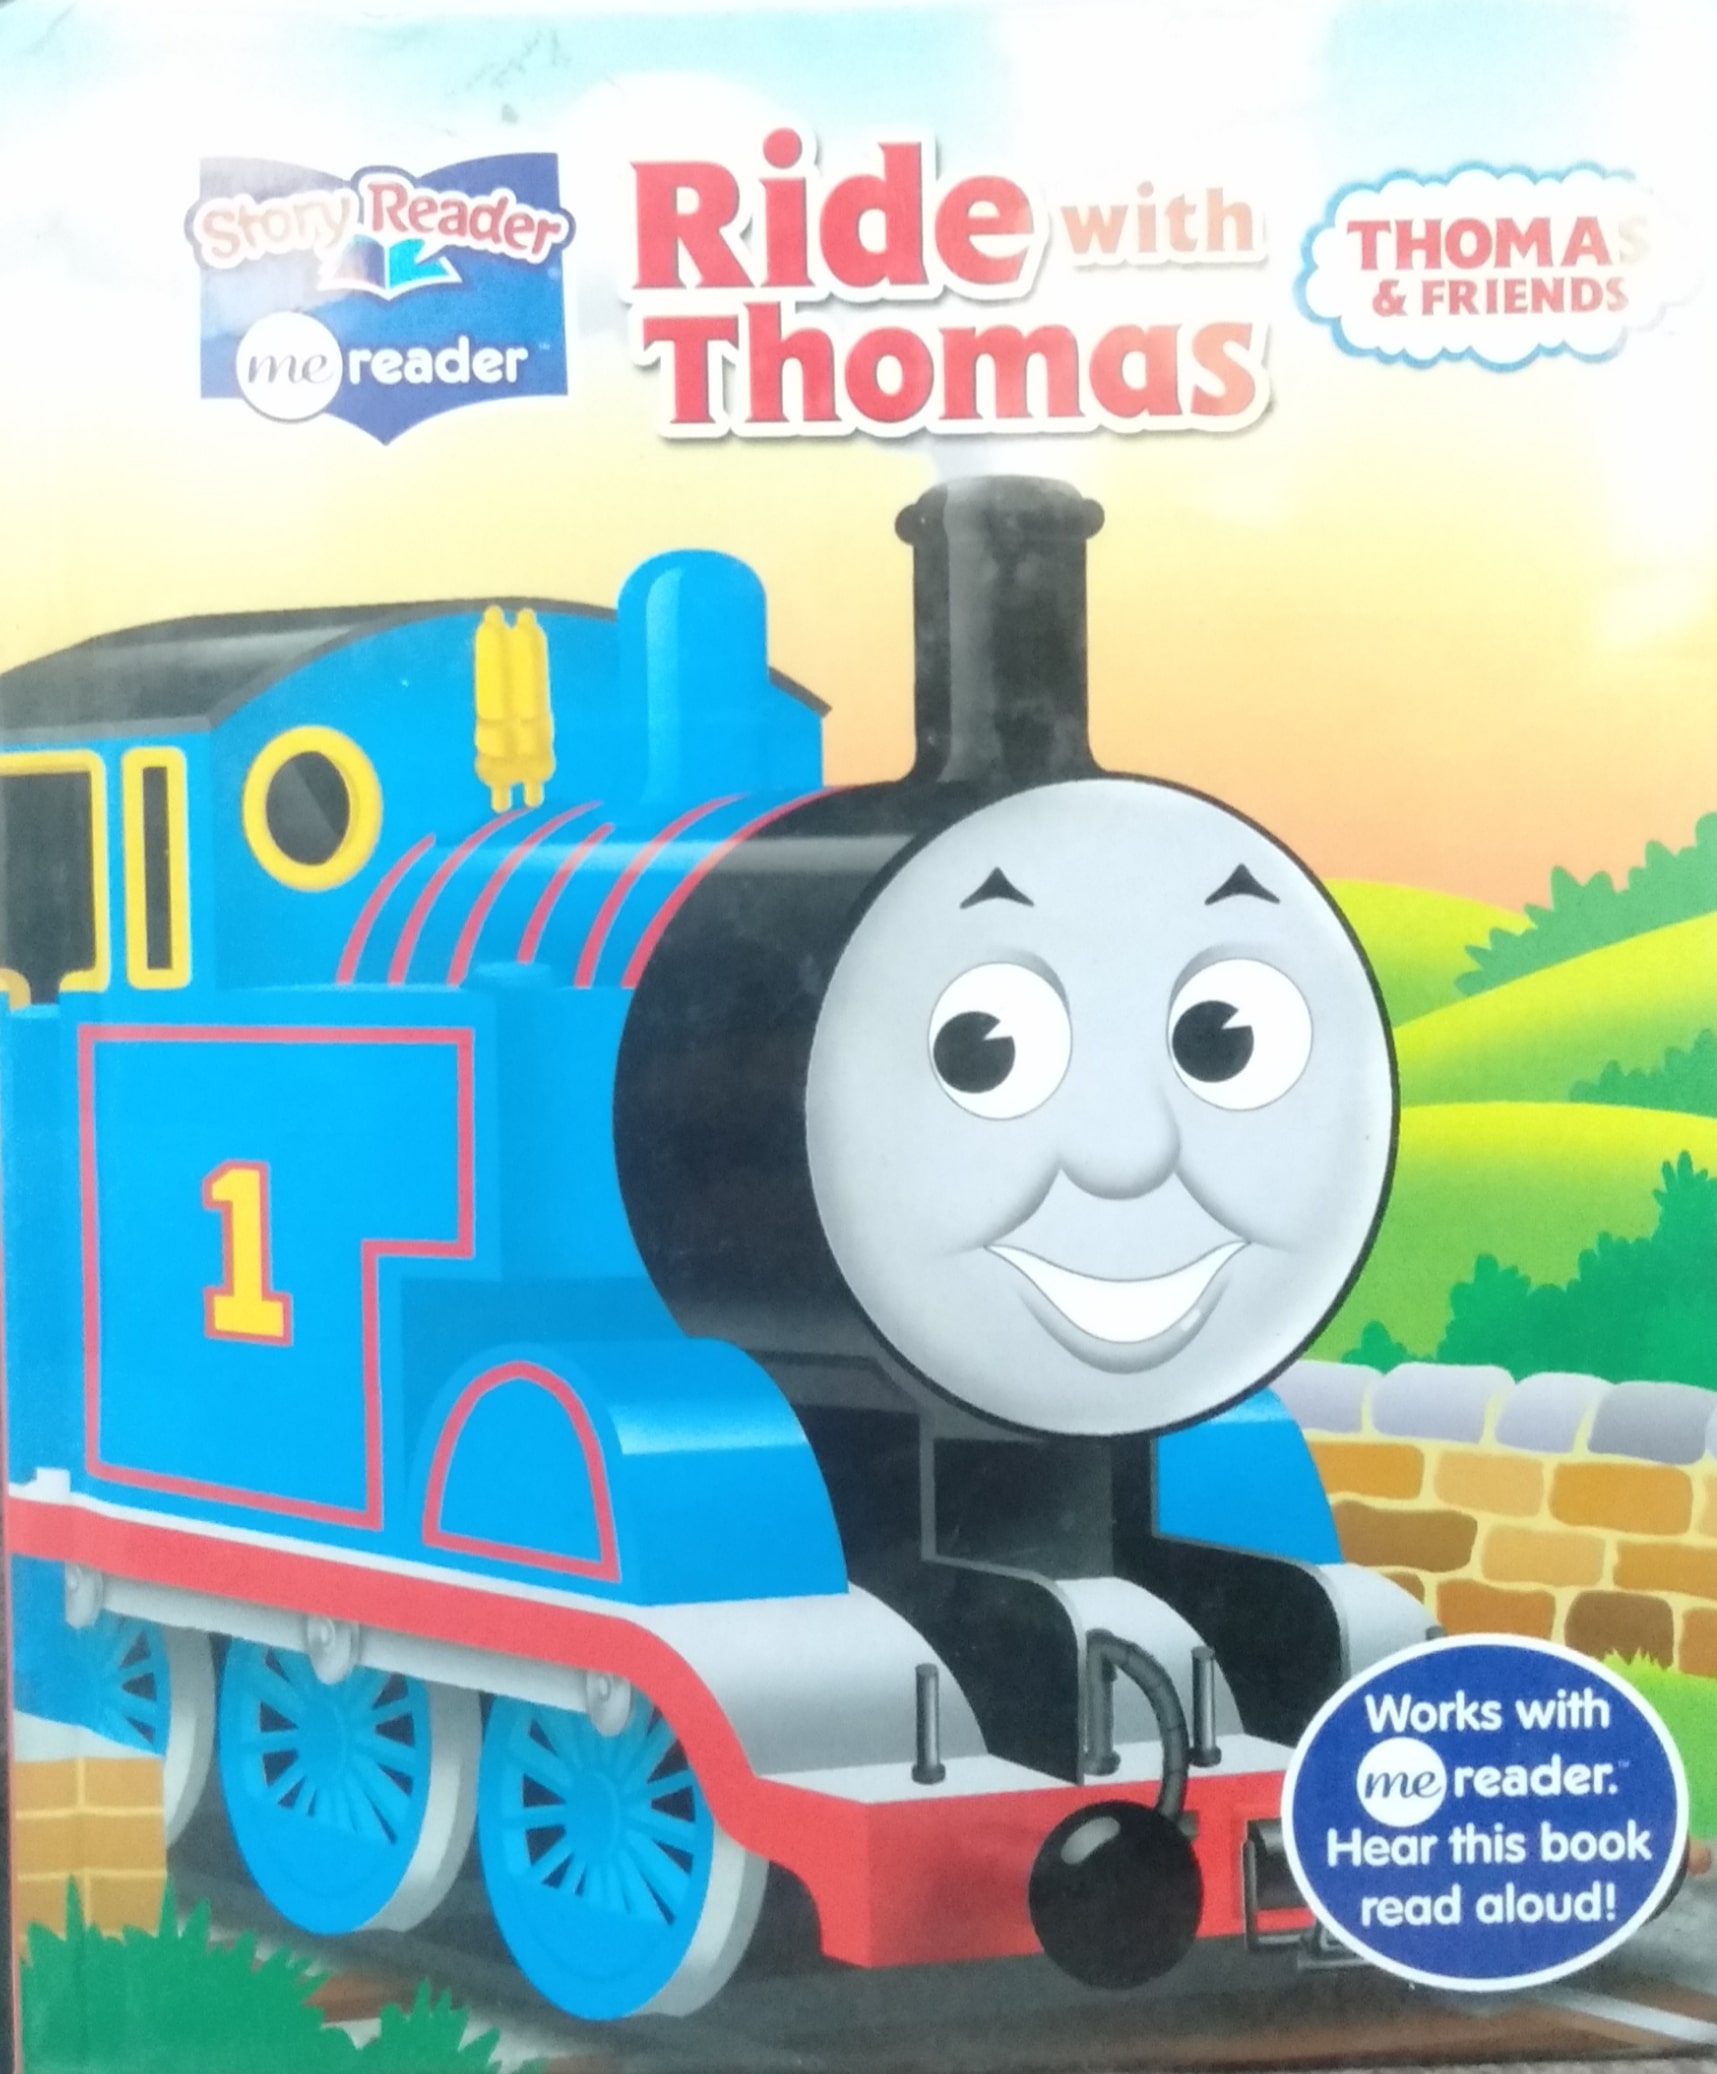 IMG : Thomas and friends - Ride with Thomas